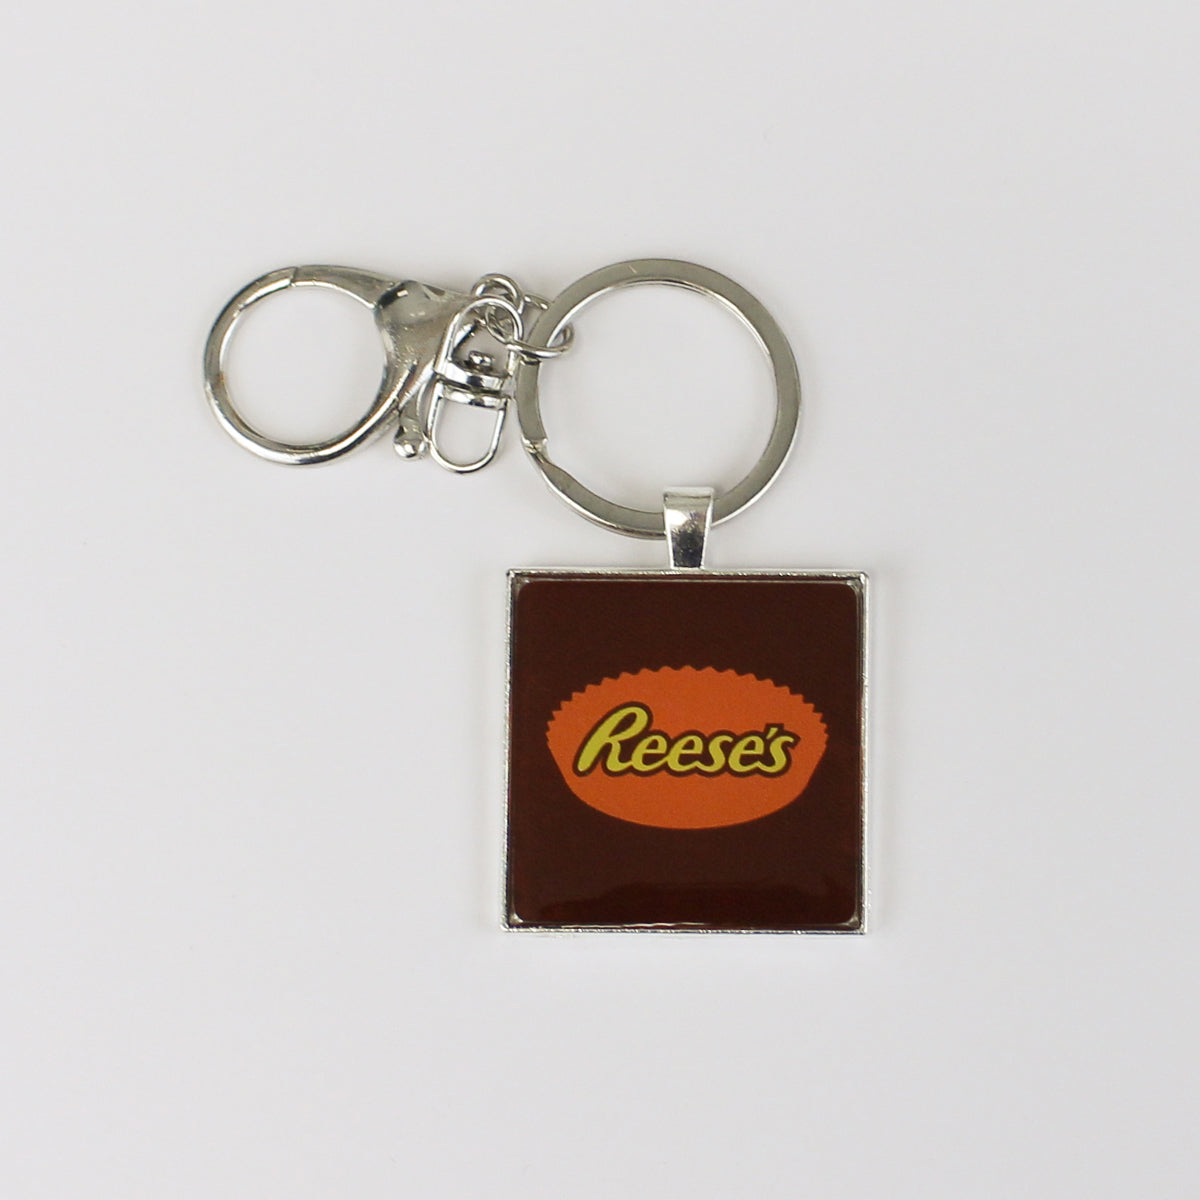 REESE'S Brown Square / Key Chain - Route One Apparel